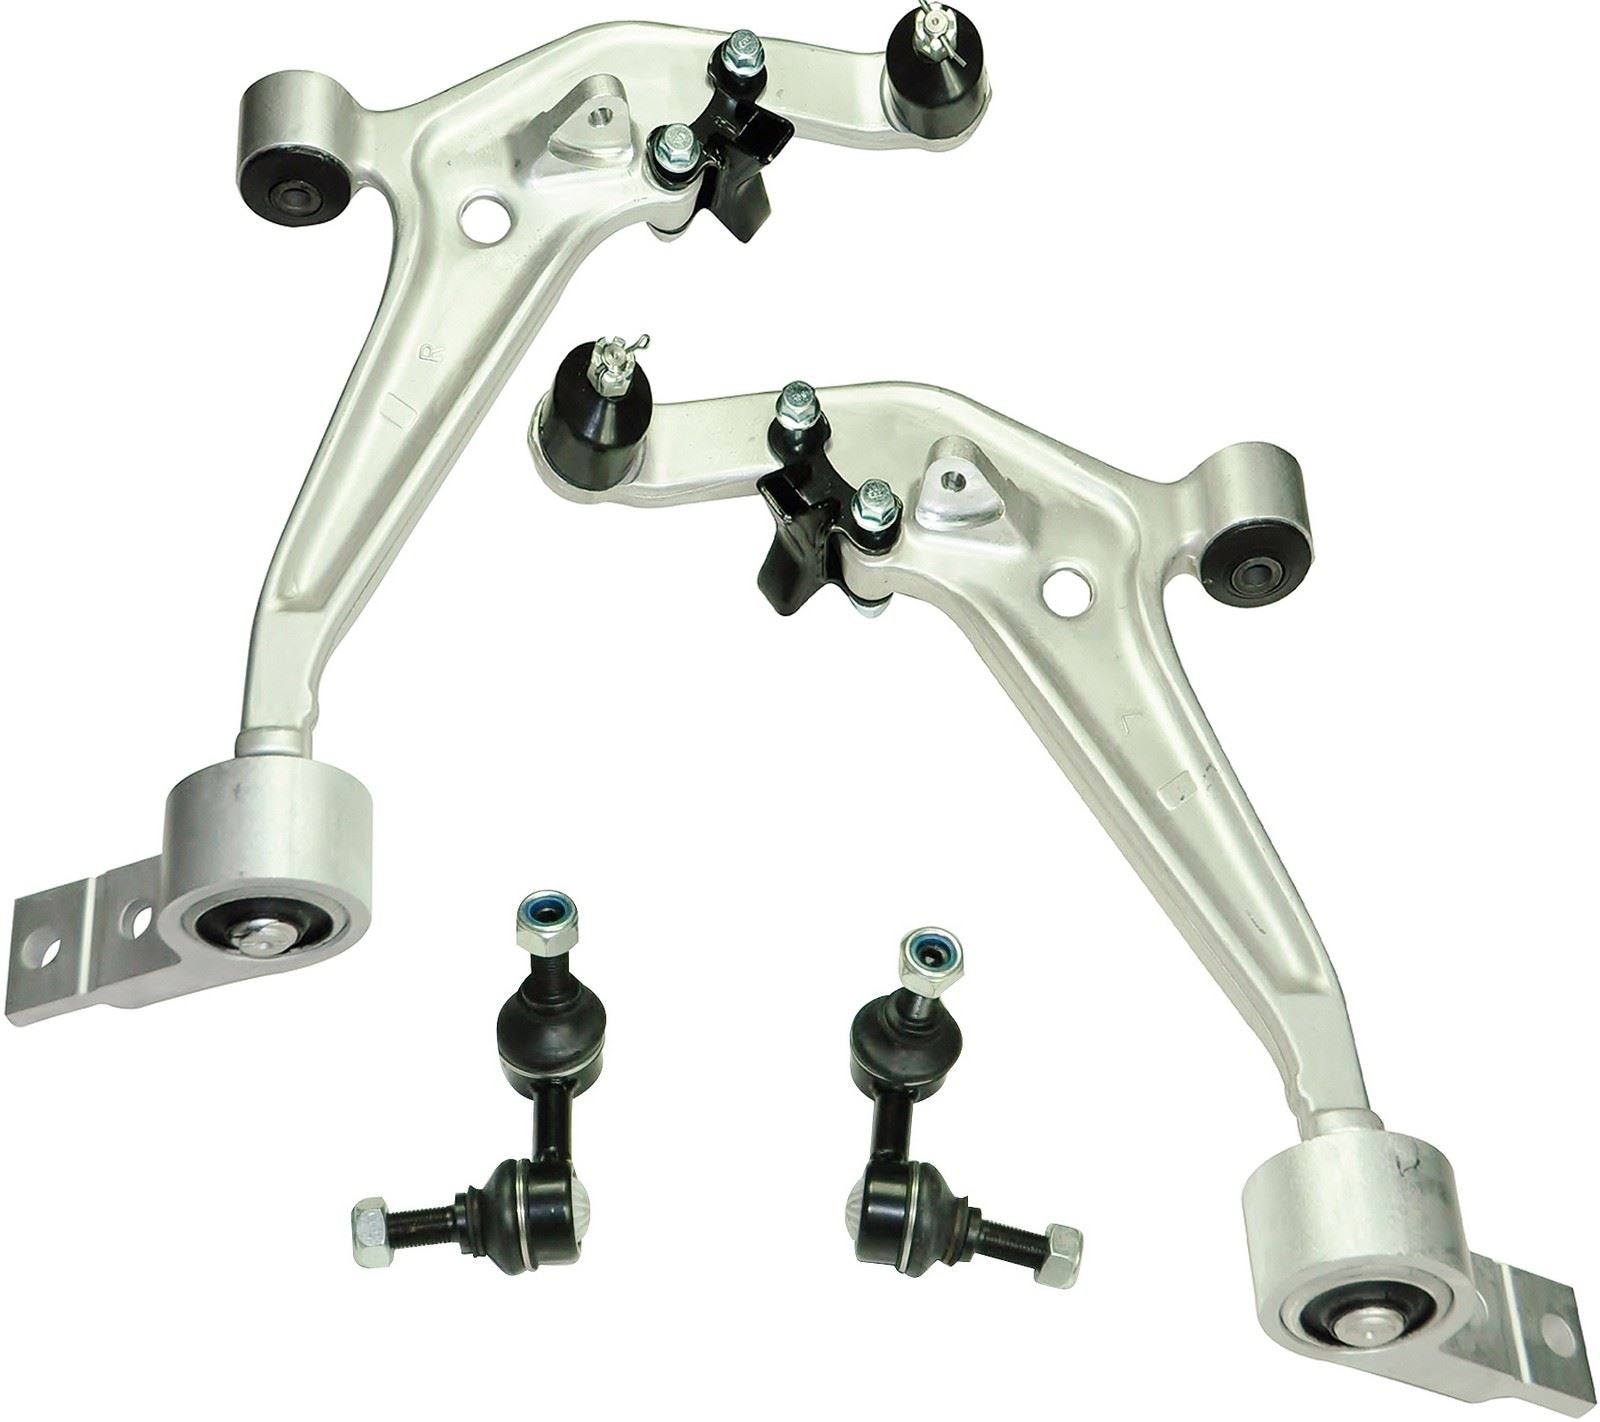 For Nissan X-Trail T30 Front Lower Suspension Wishbone Track Control Arms & Links Kit 546688H300, 546188H300